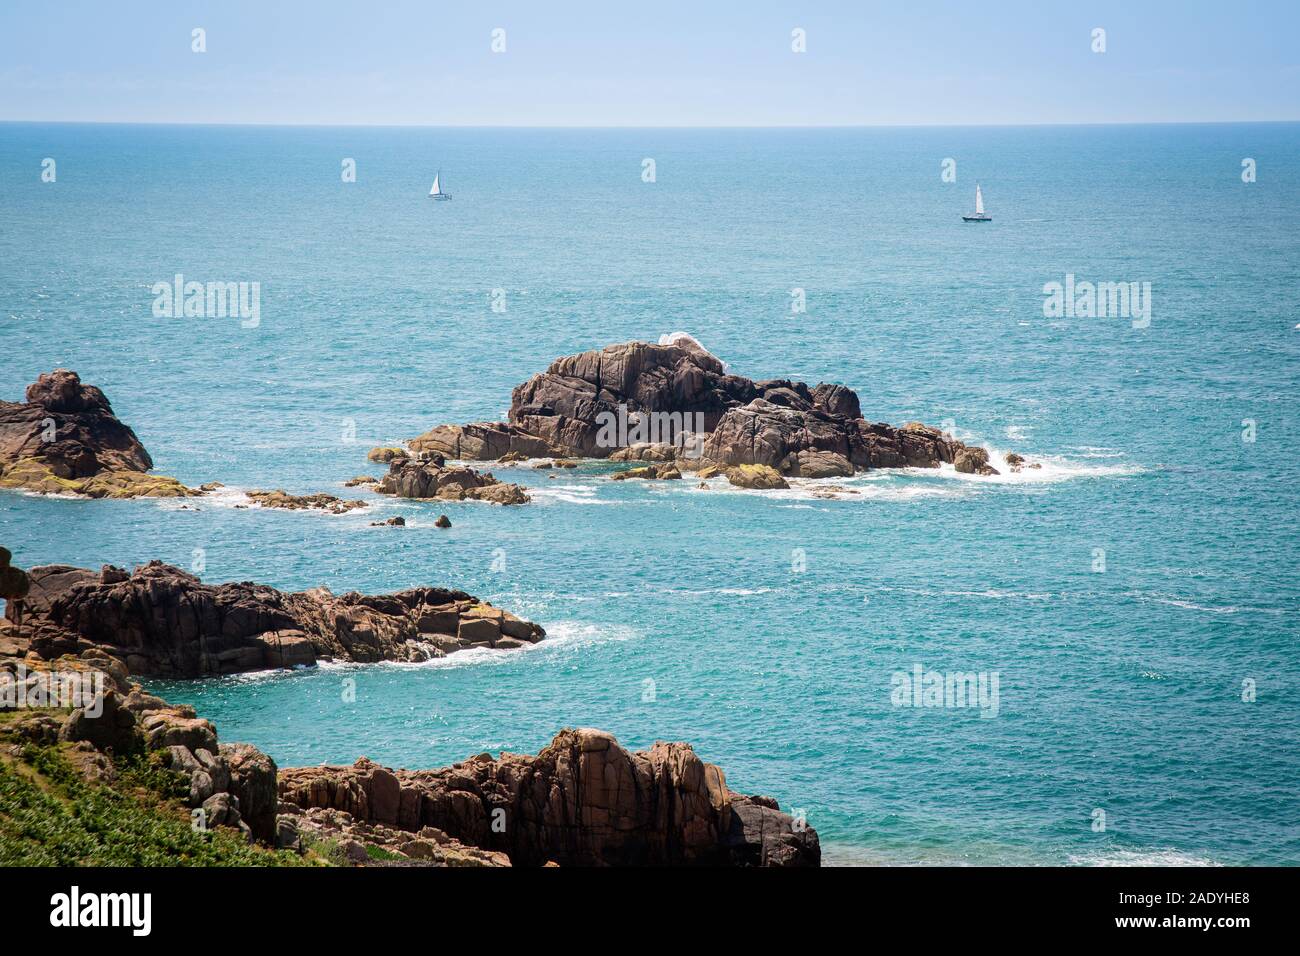 Seaview off the coast of Jersey, Channel Islands Stock Photo